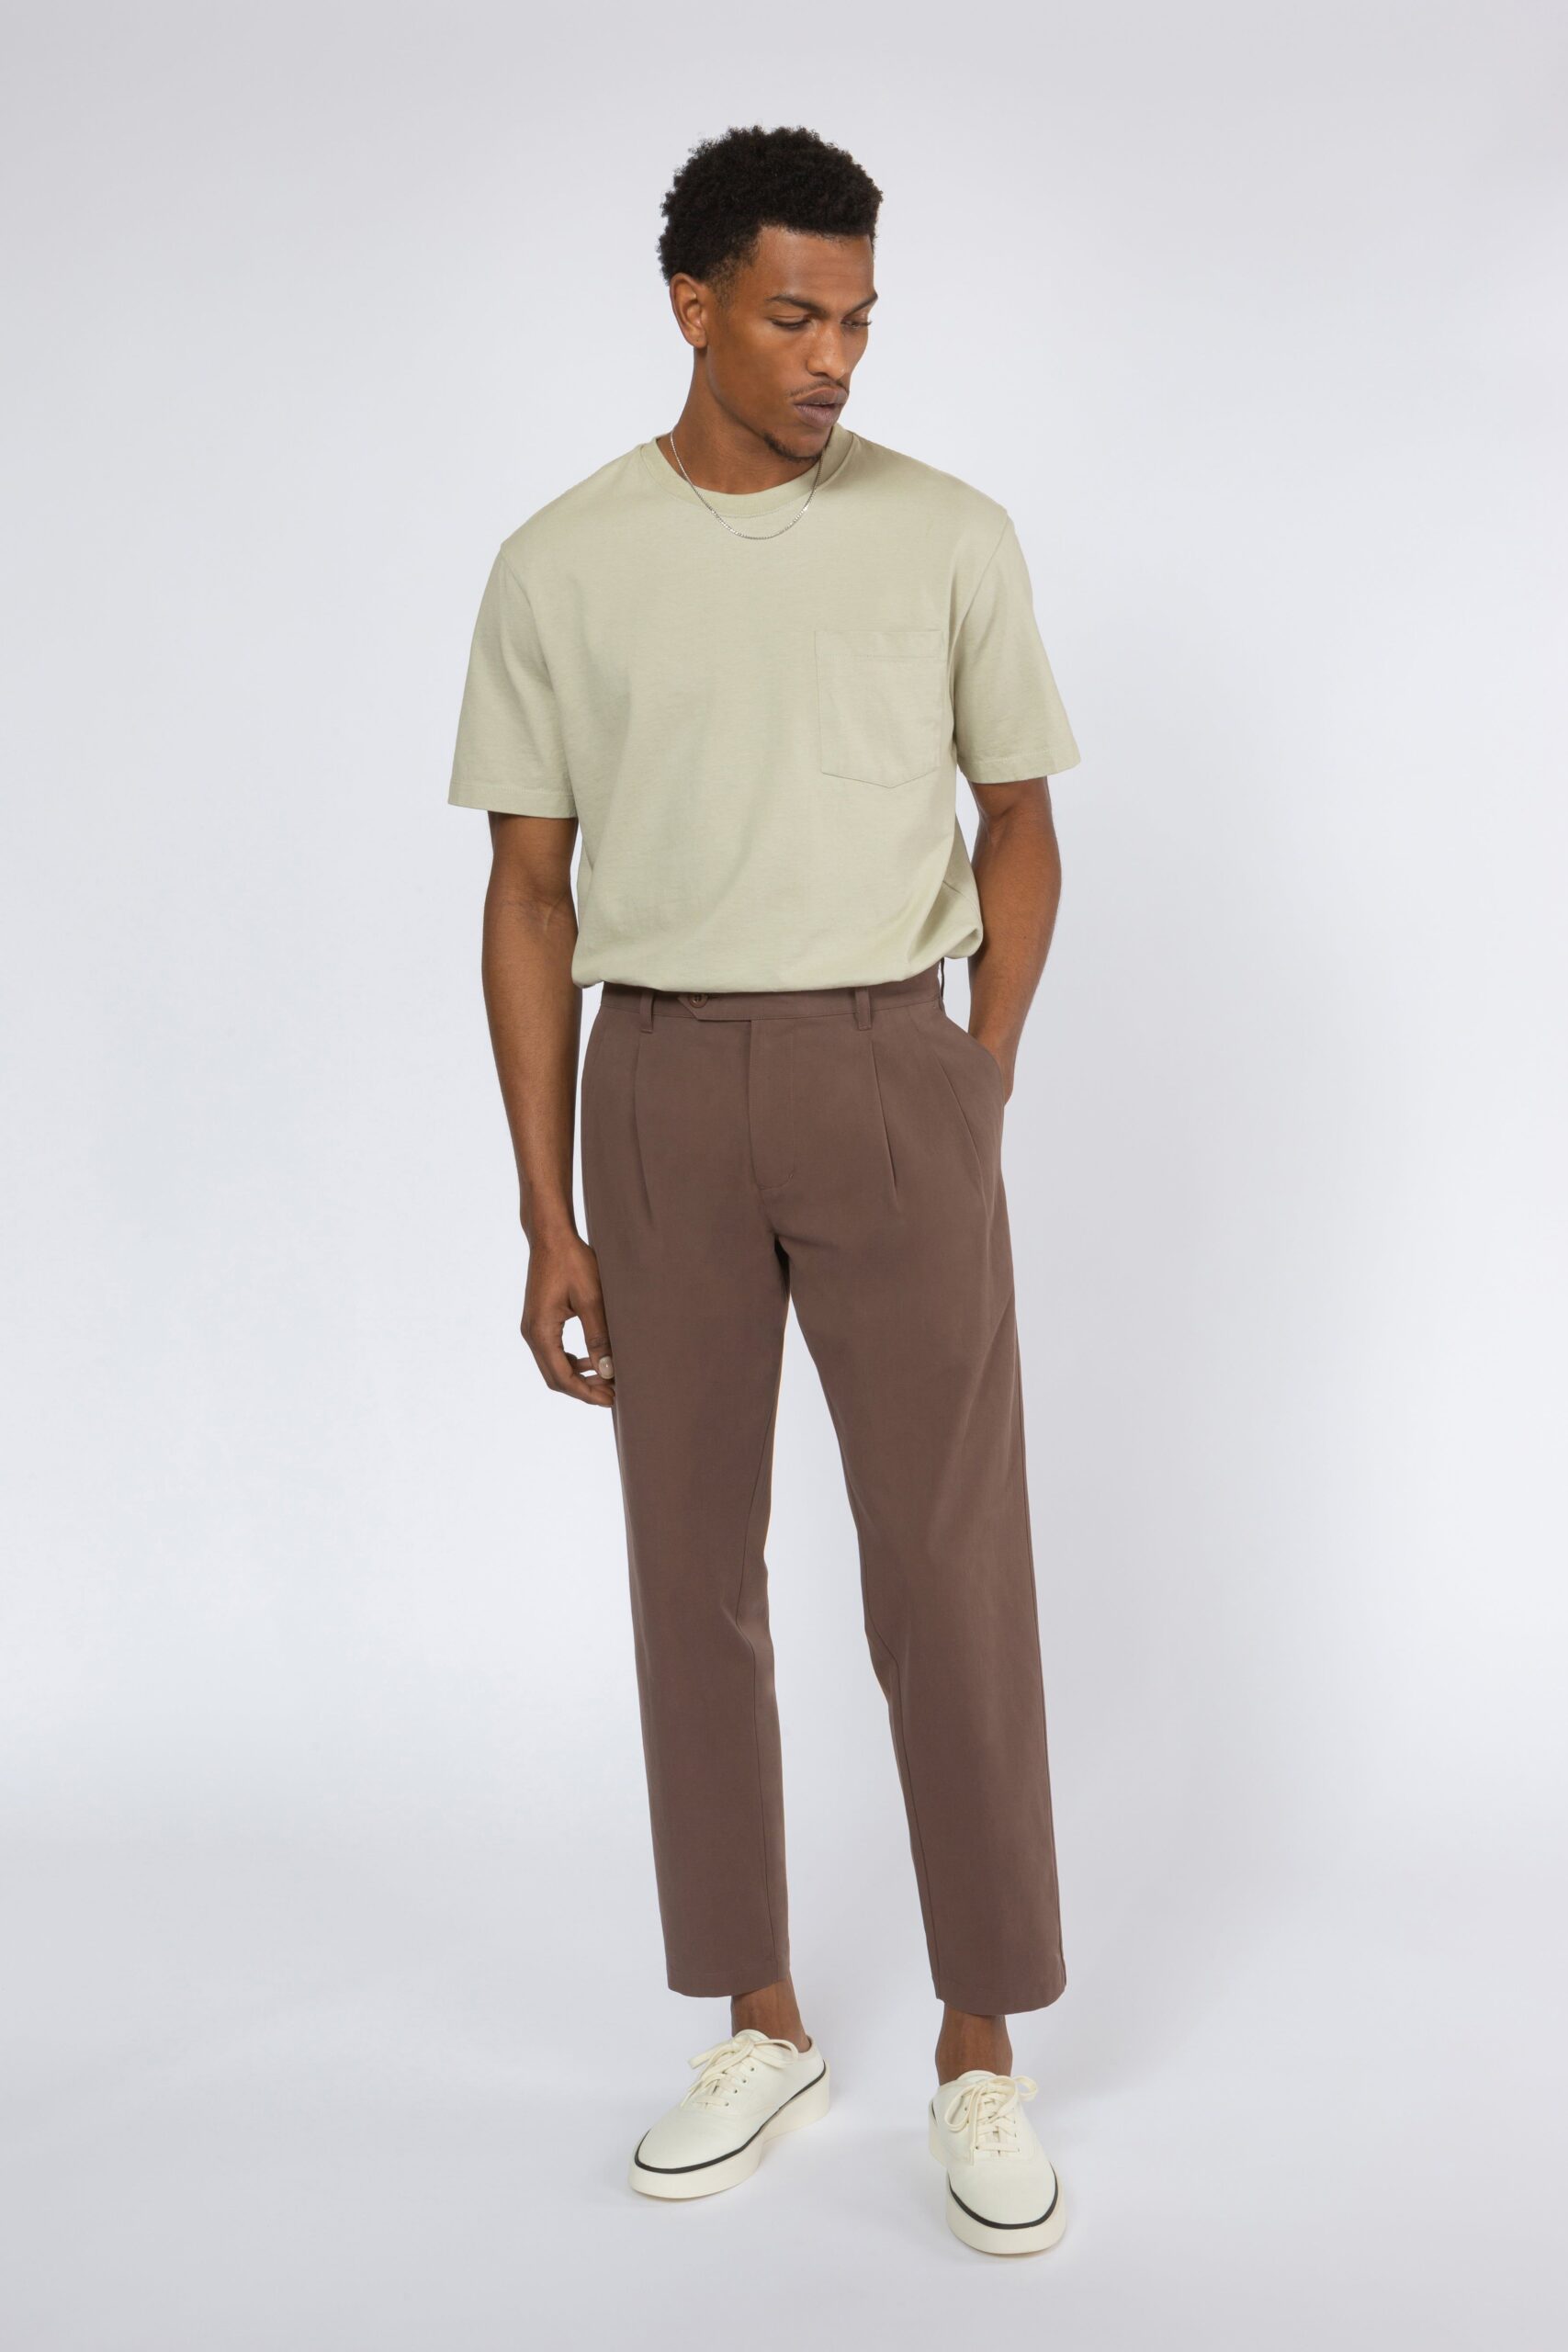 Stay Classy and Sophisticated in Stylish
Men’s Chinos: Effortless and Versatile